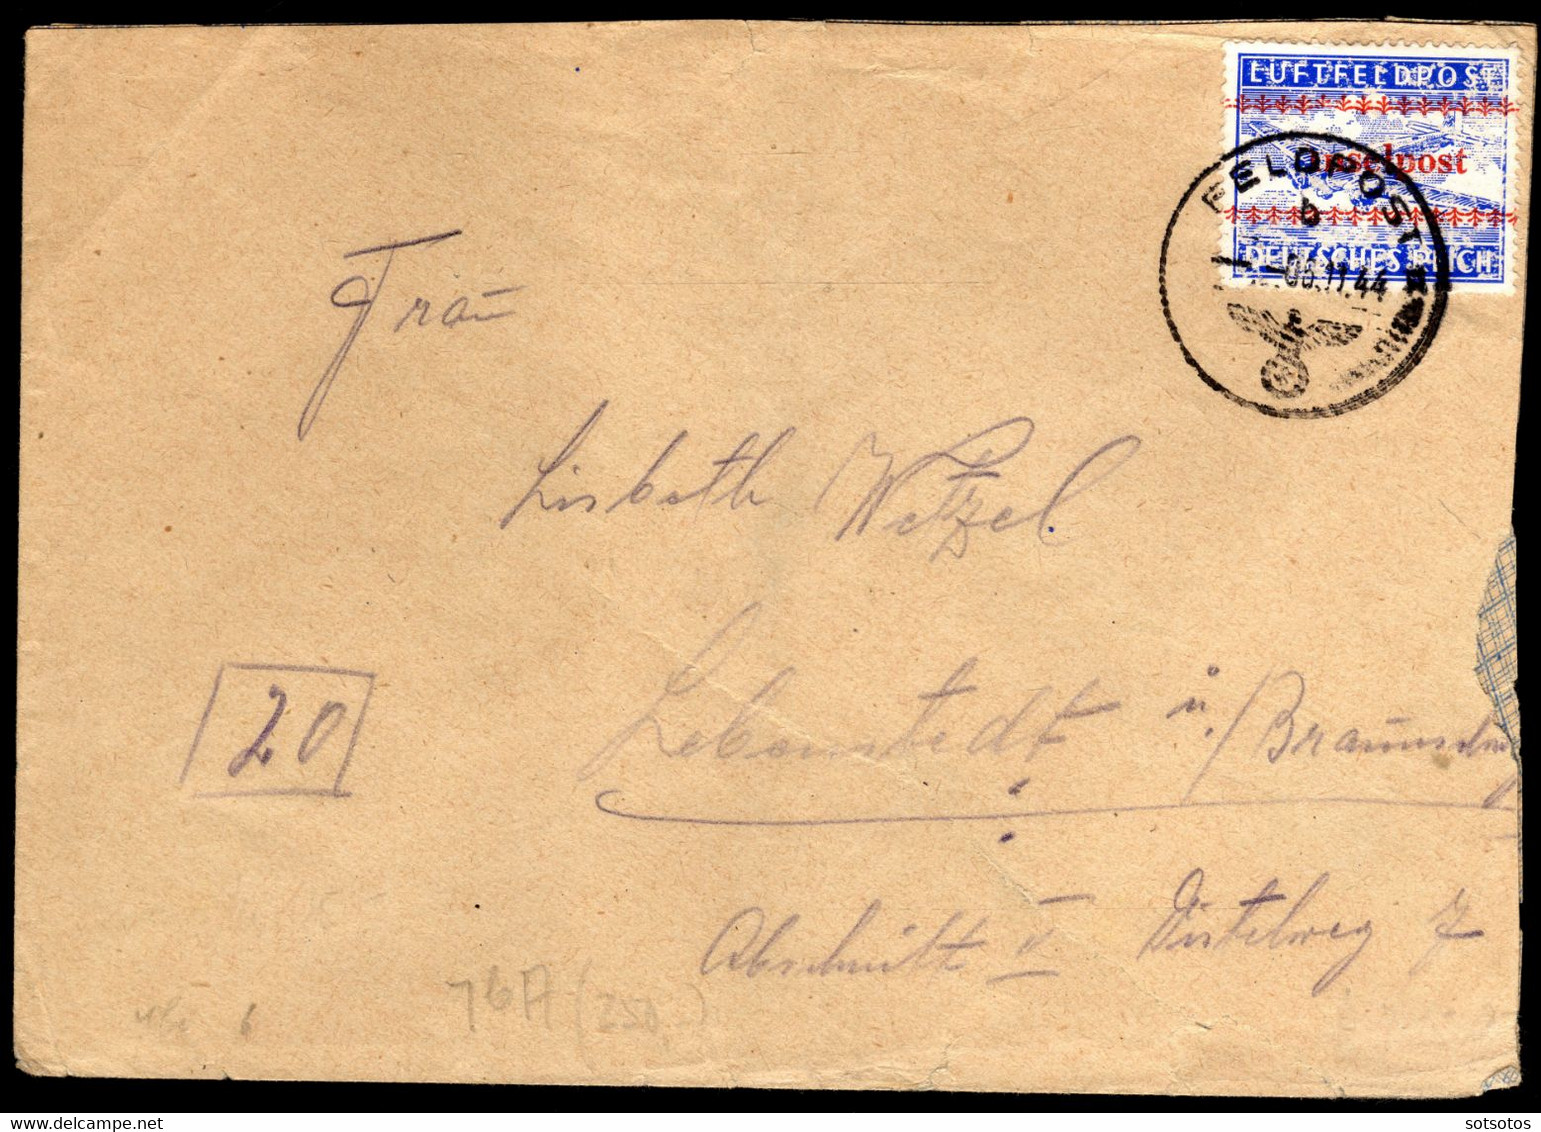 CRETE 5.11.1944: GERMAN OCCUPATION Surcharged INSELPOST German Air Post Stamp On Cover (M #7 - Hellas #1)  Extremely Rar - Crete